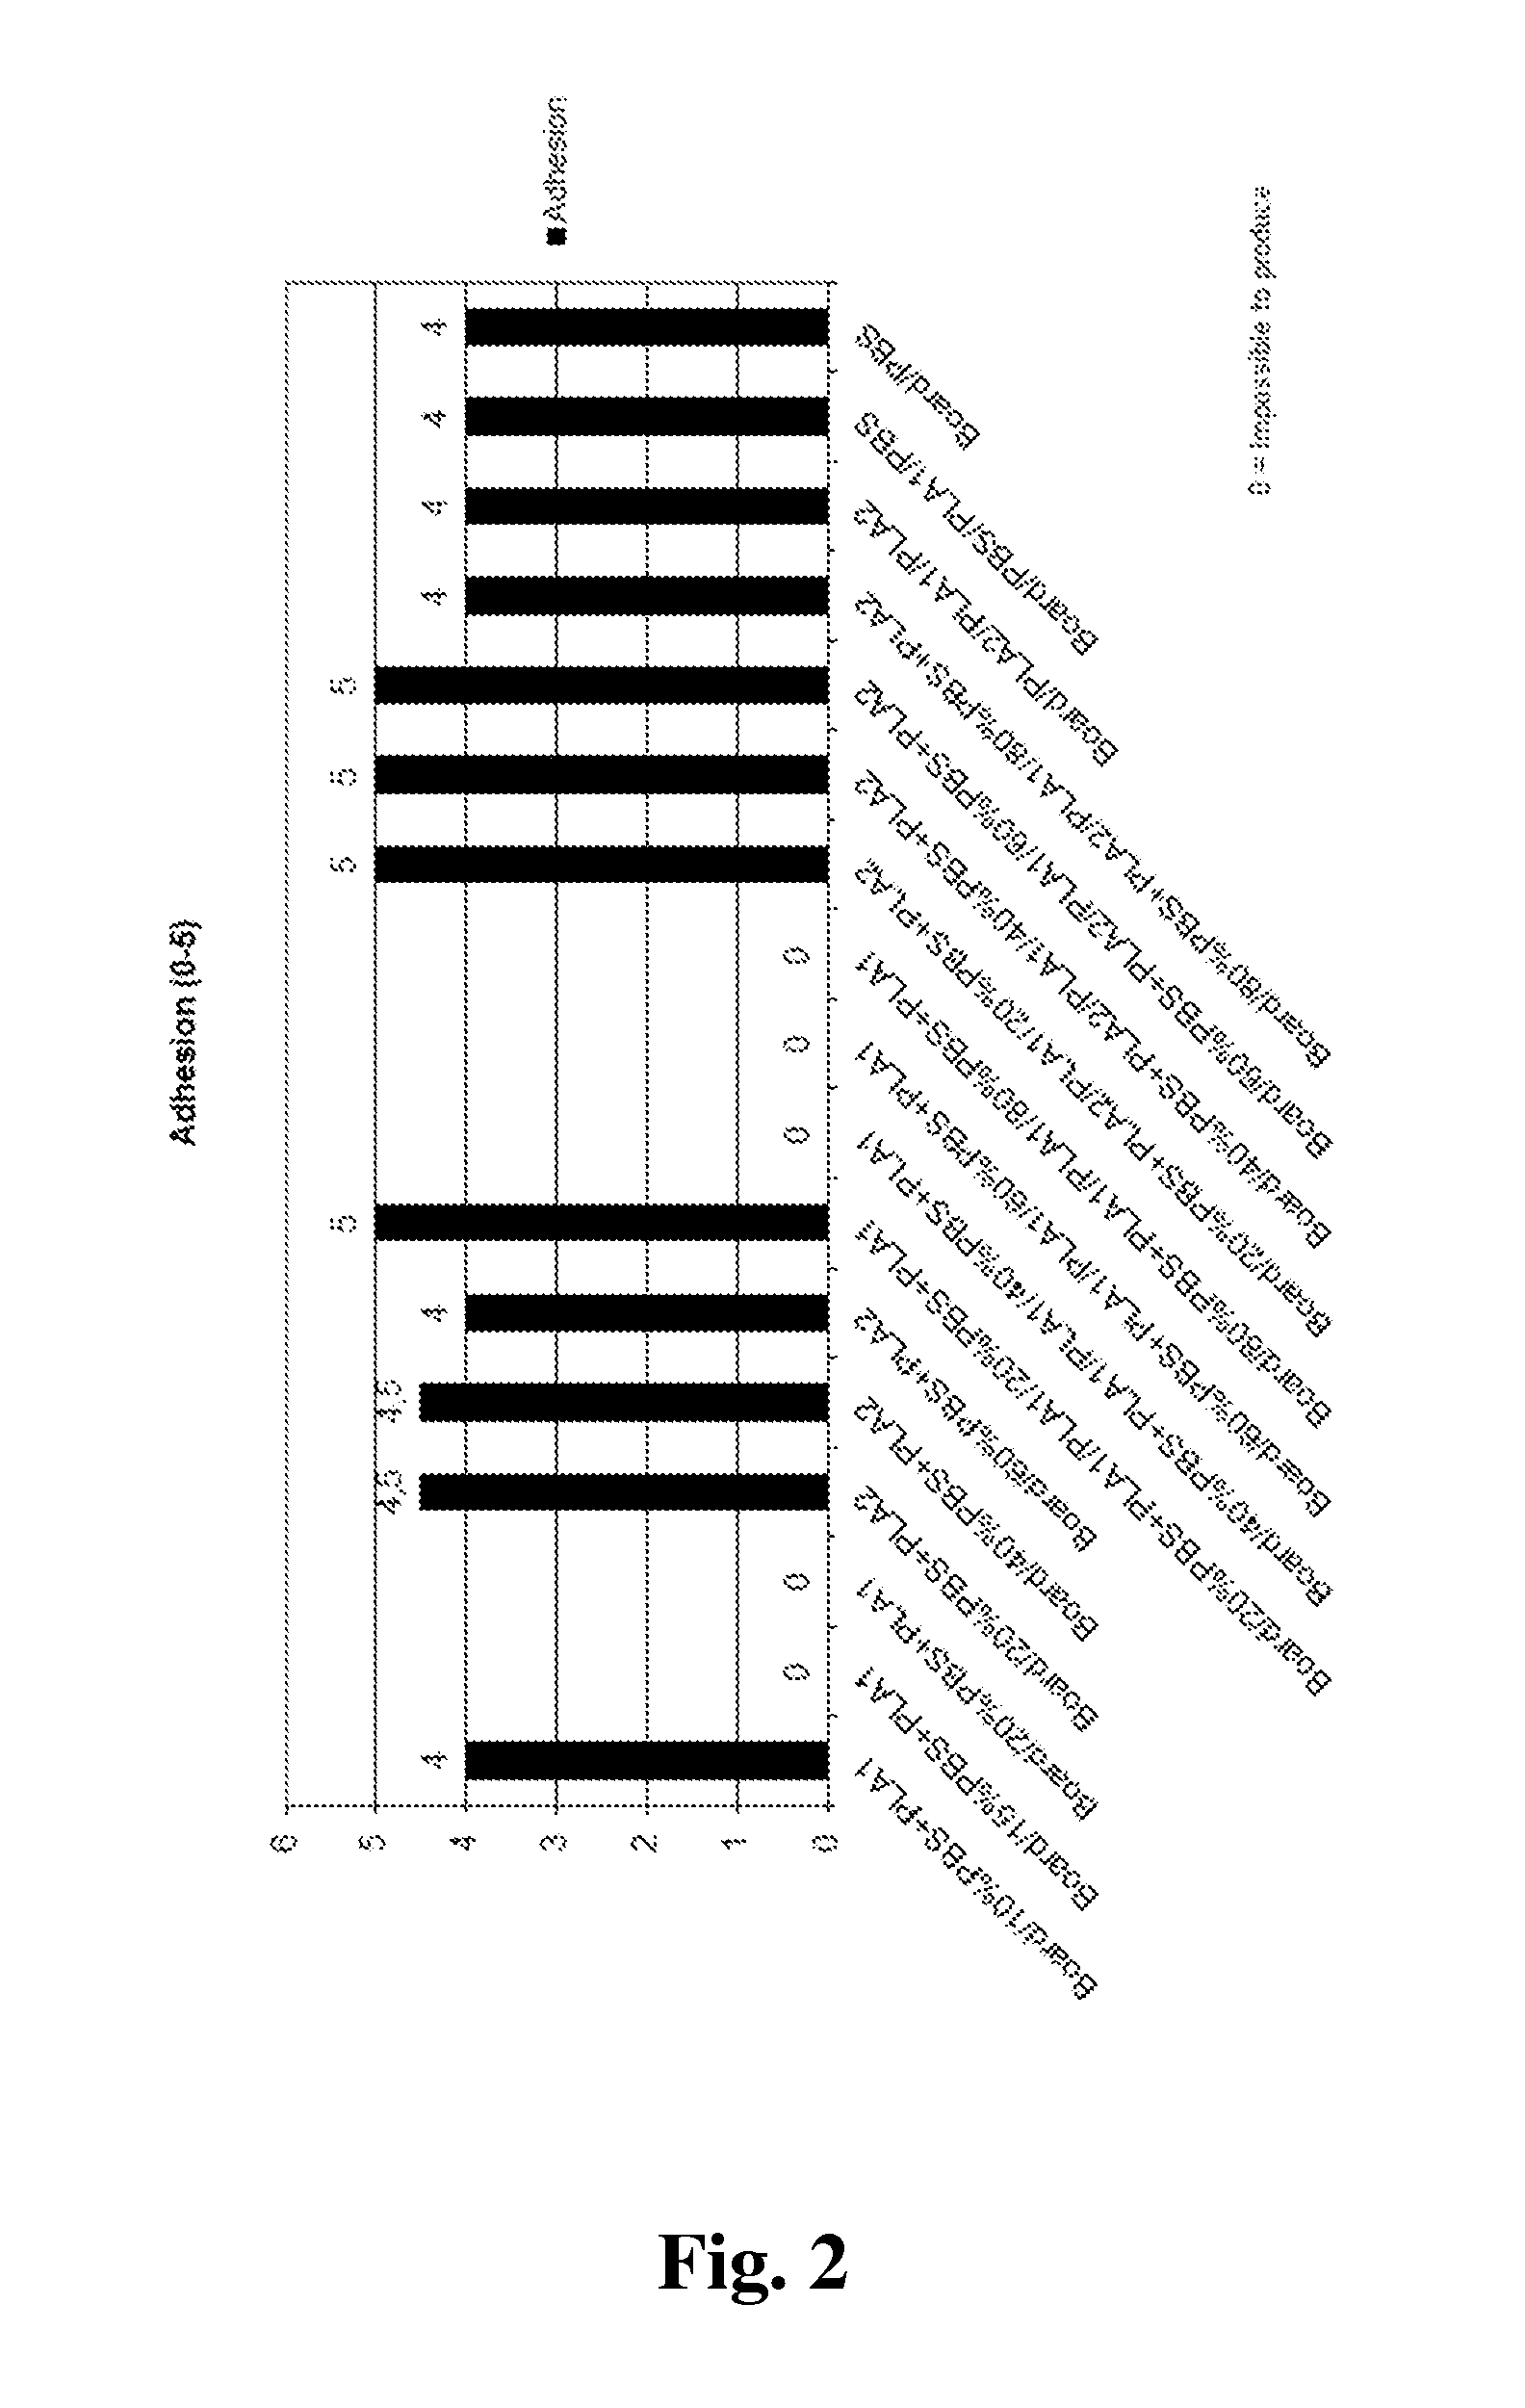 Method for manufacturing biodegradable packaging material, biodegradable packaging material and a package or a container made thereof